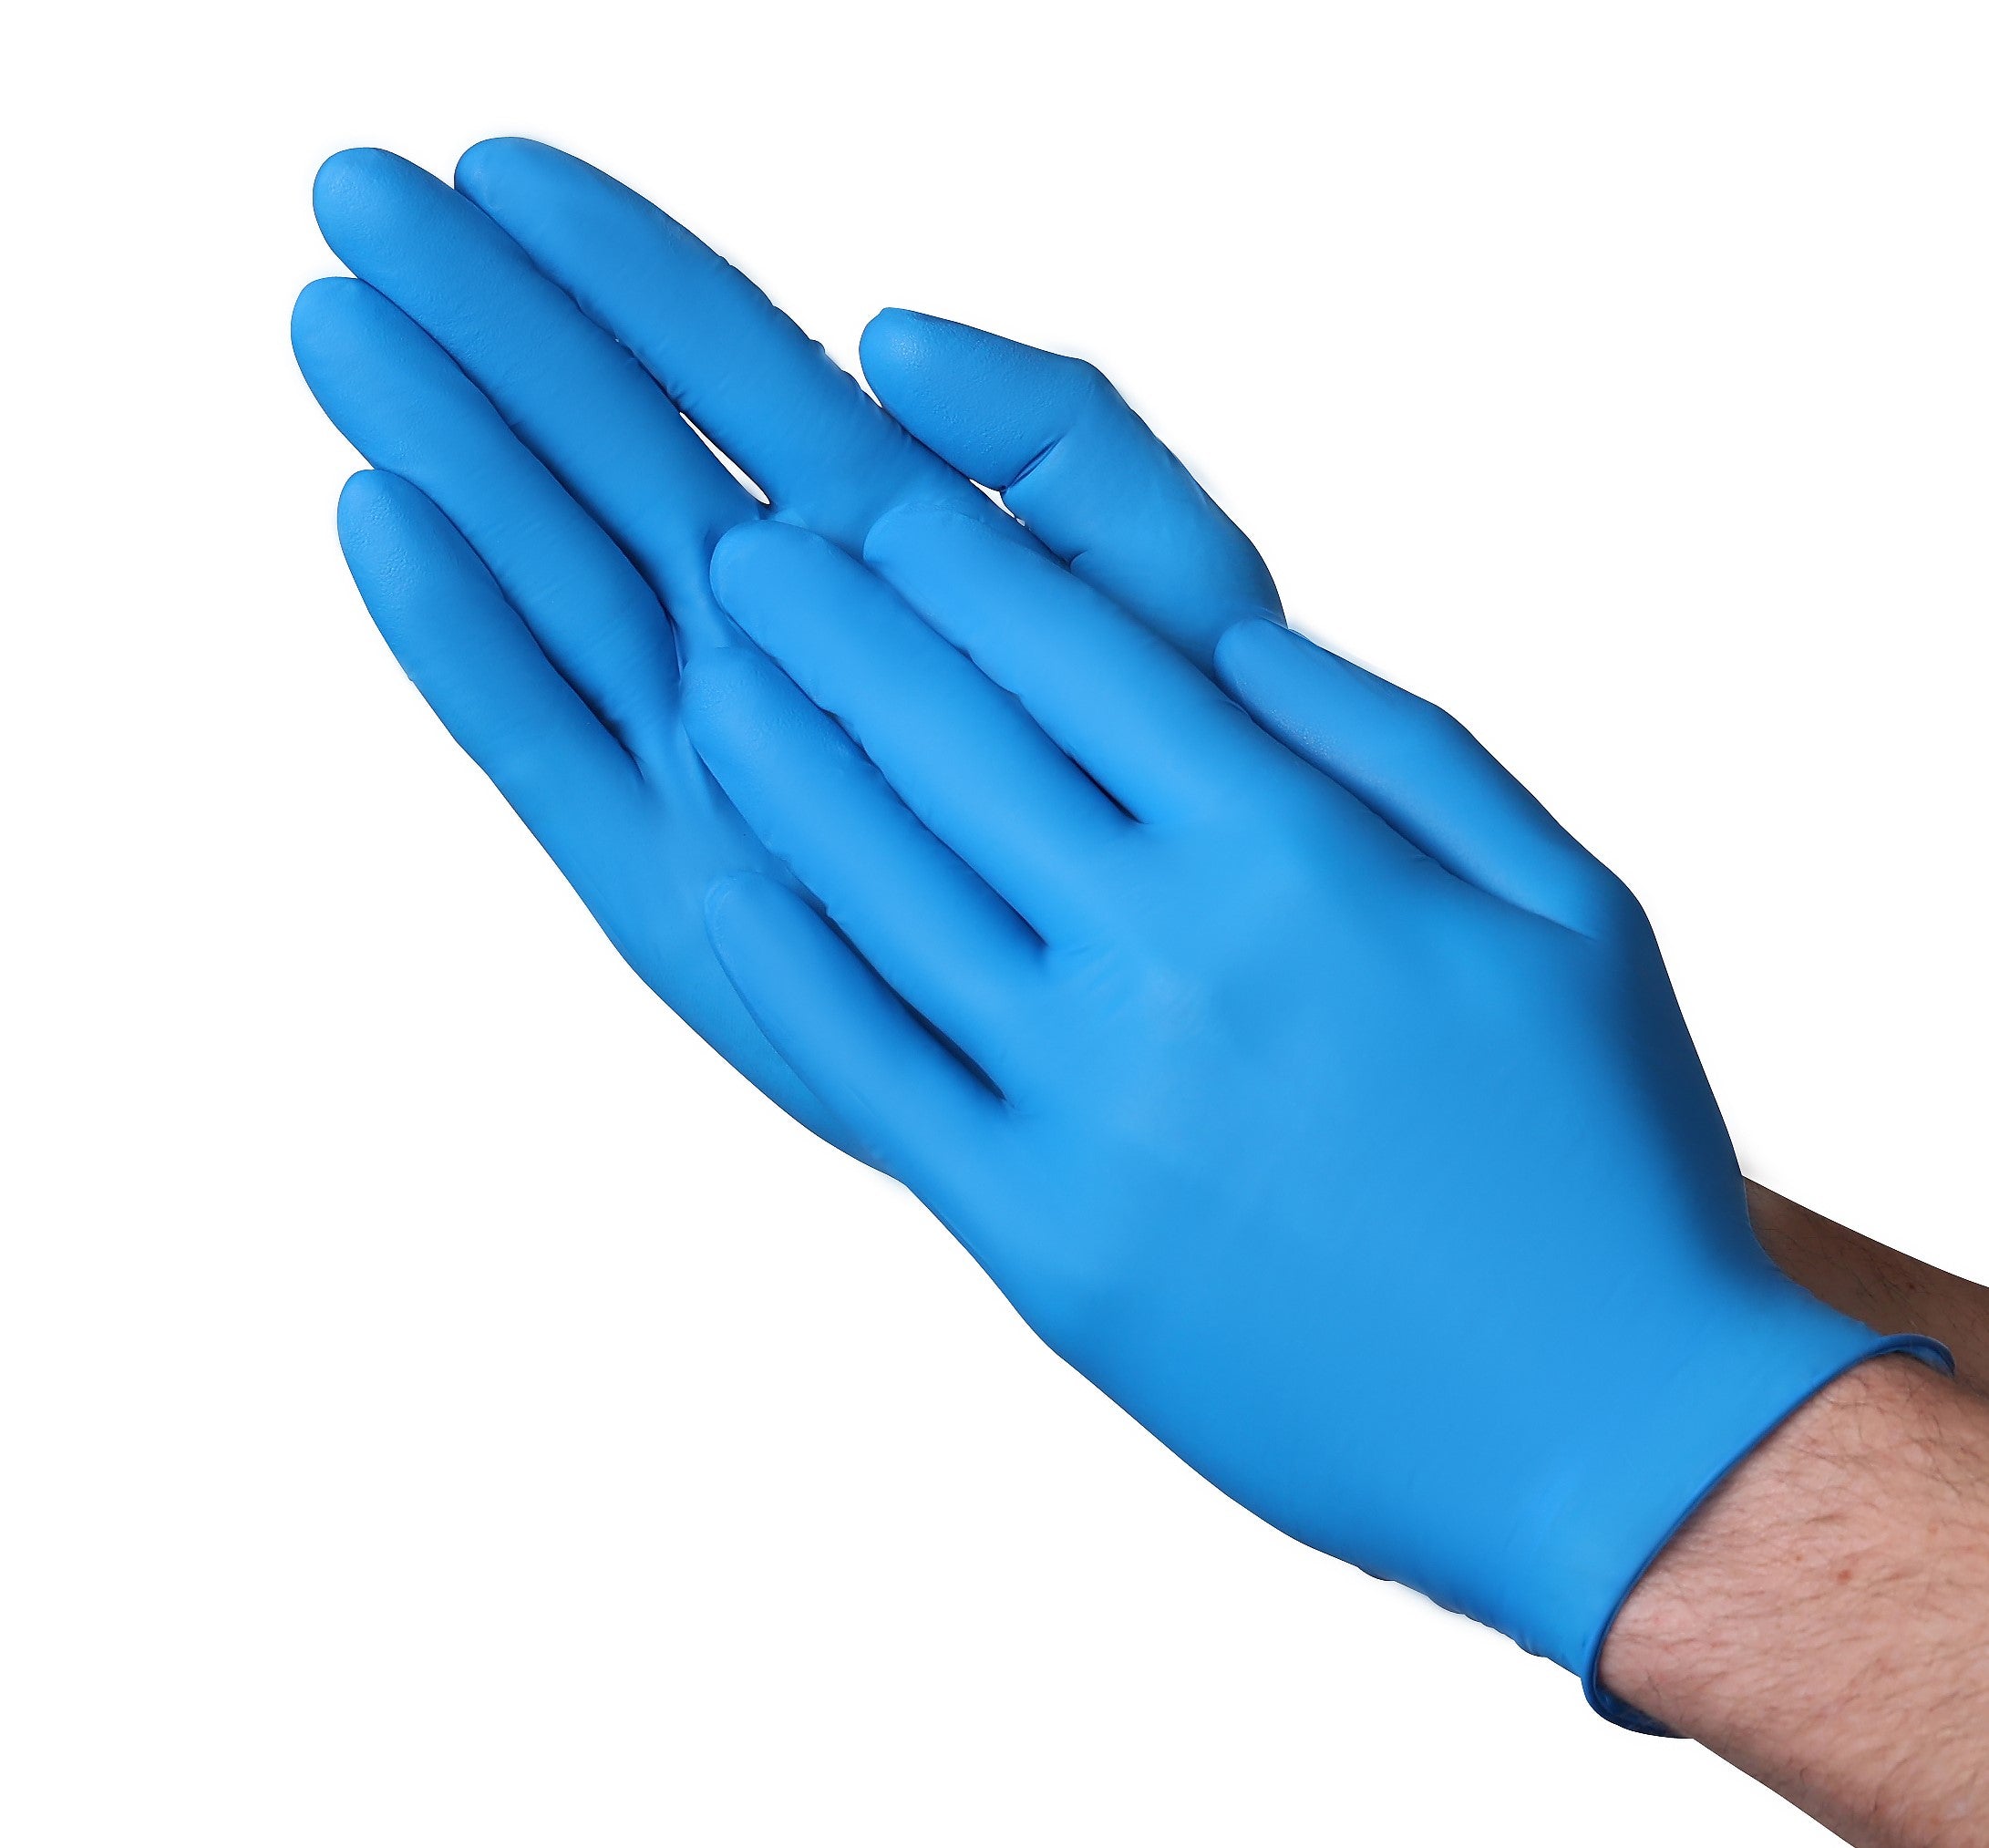 General Electric GG215 Blue Smooth Nitrile Dipped Gloves - Single Pair